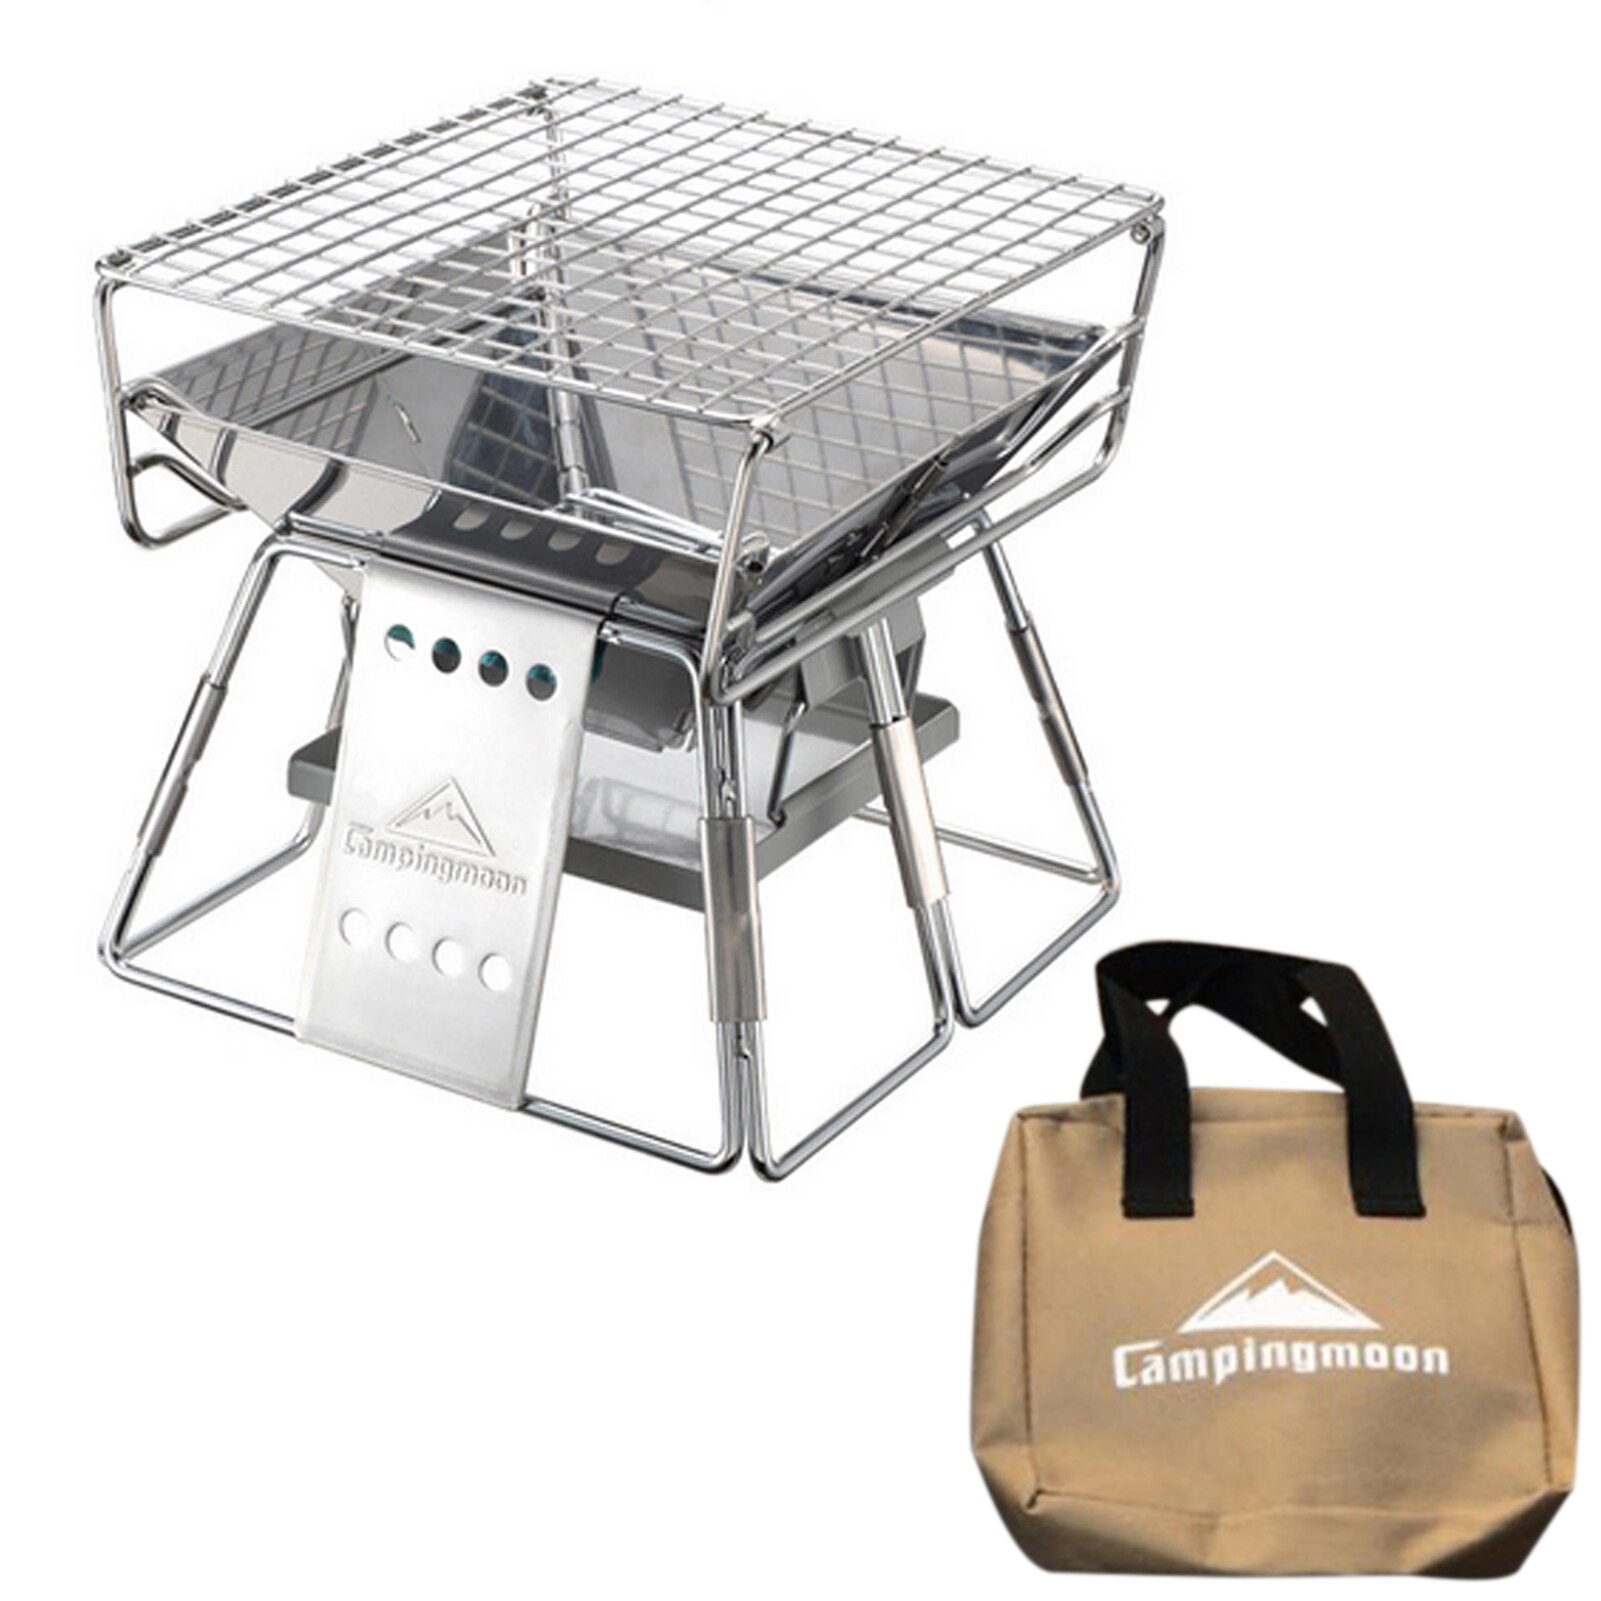 Camping Bbq Grill Draagbare Roestvrij Staal Vouwen Barbecue Grill Ultra-Kleine Barbecue Oven Voor Camping Picknick Tool